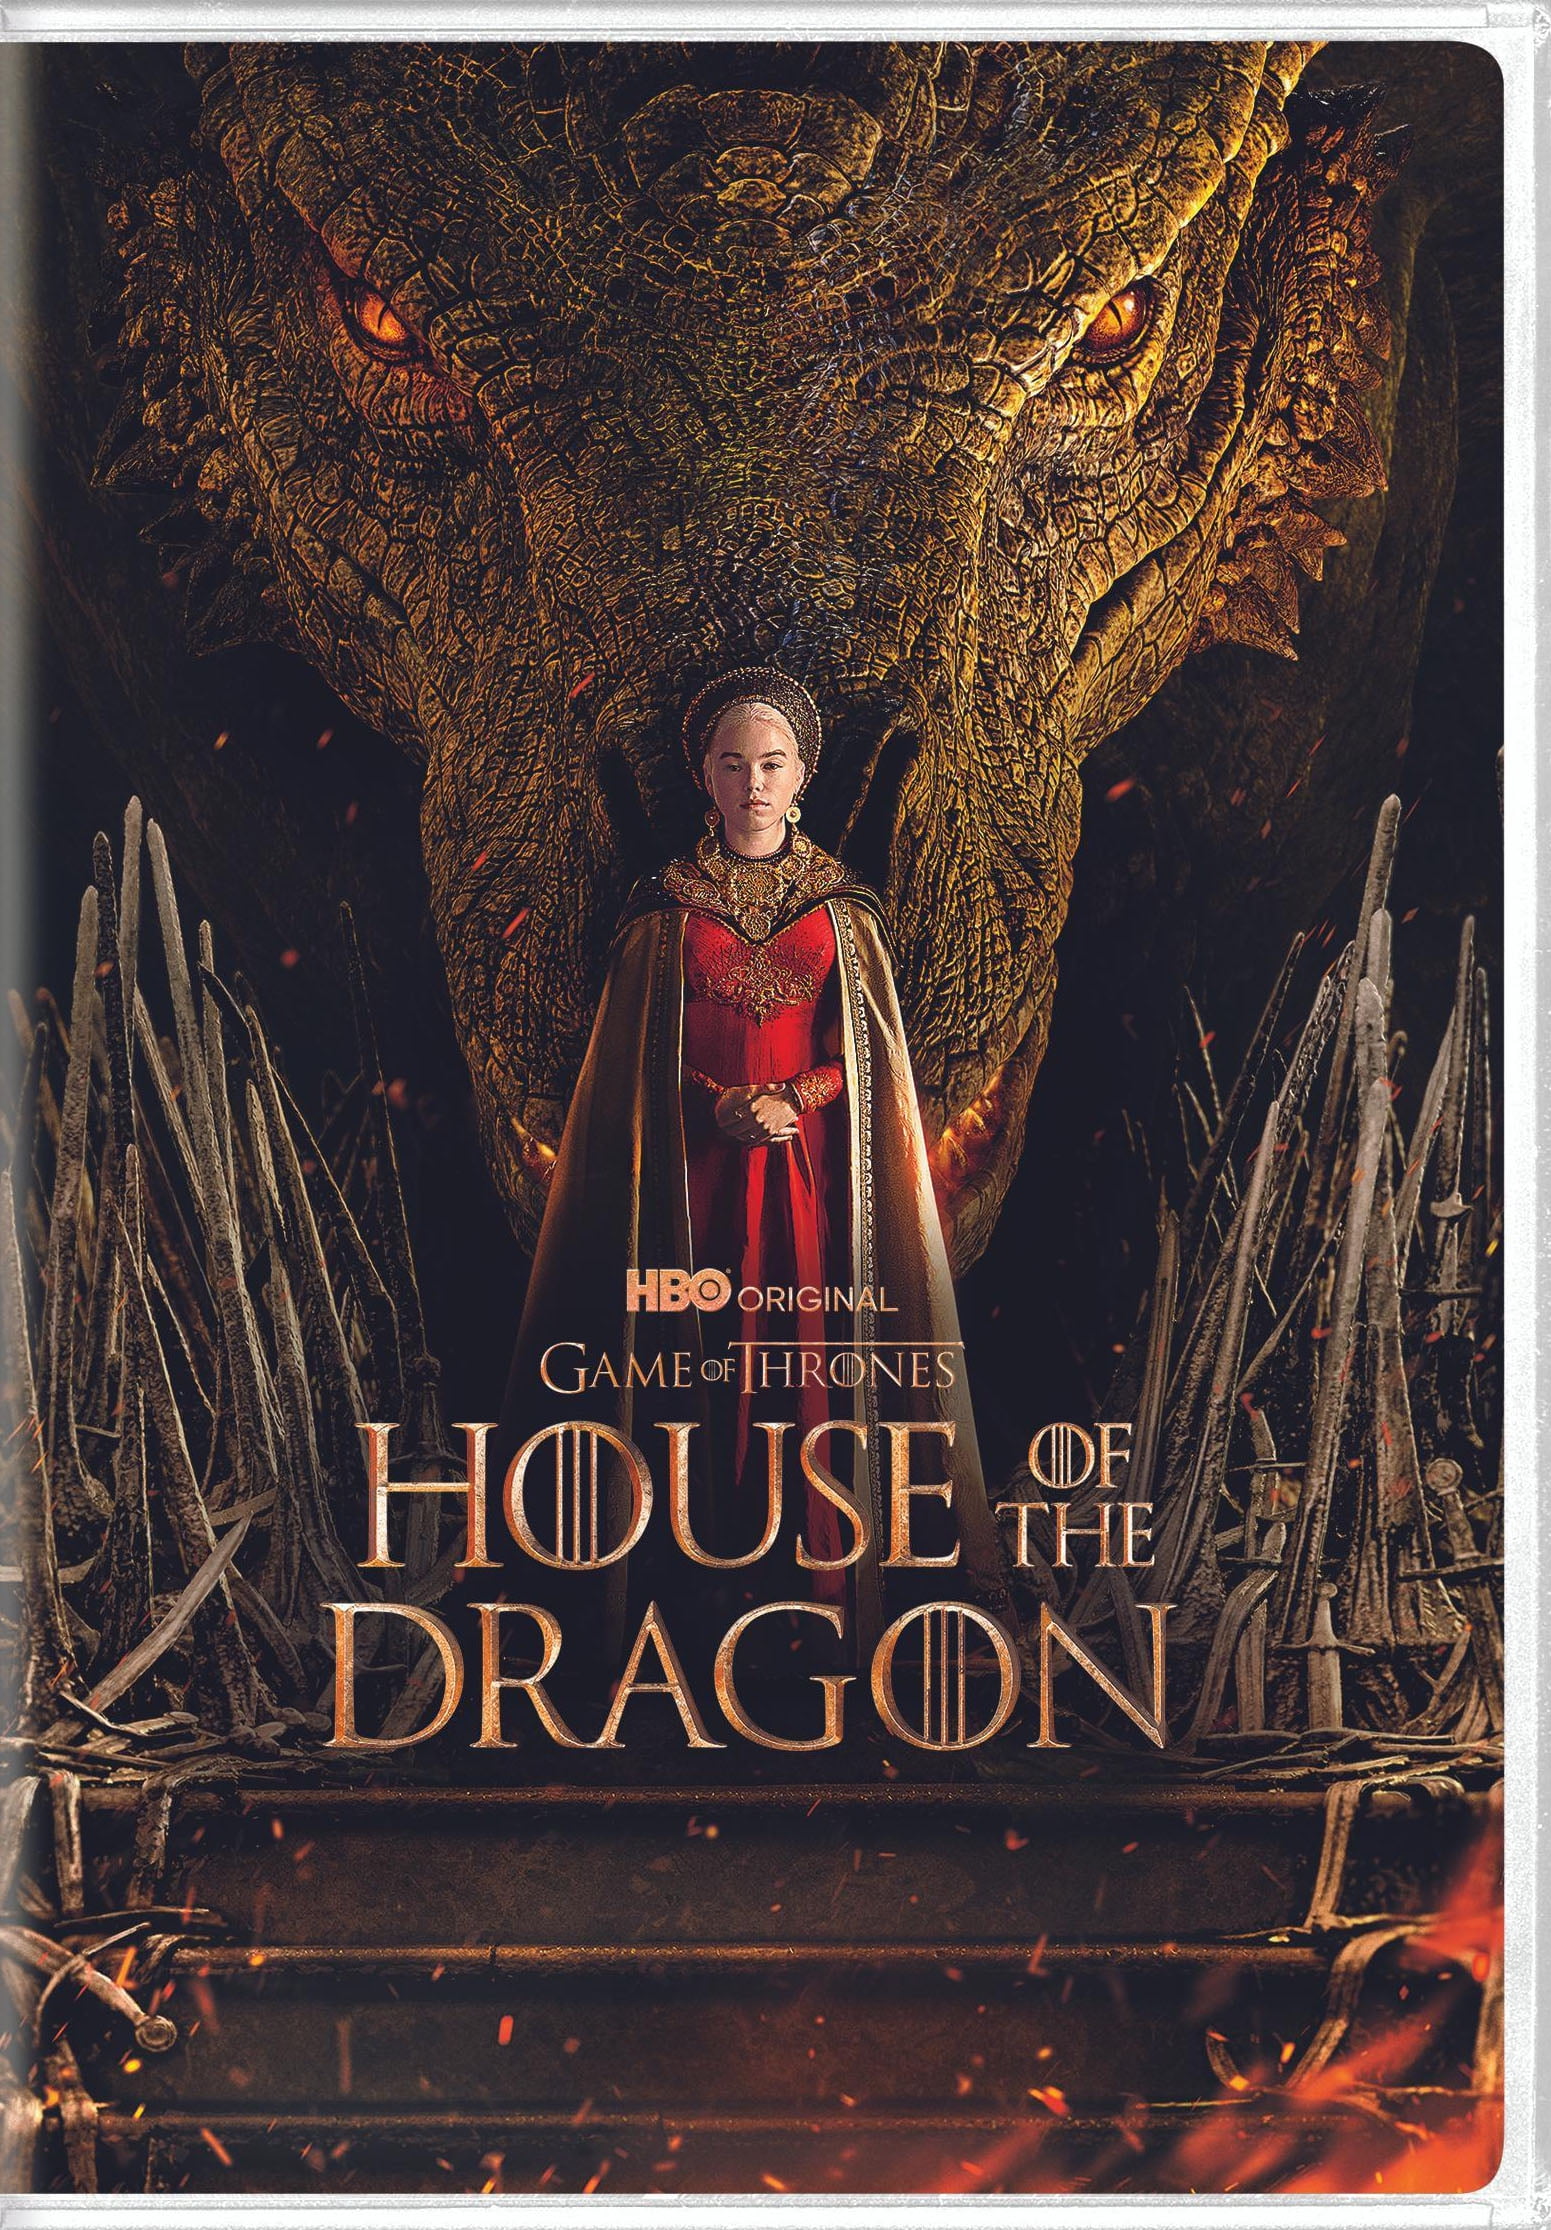  House of the Dragon: The Complete First Season (DVD